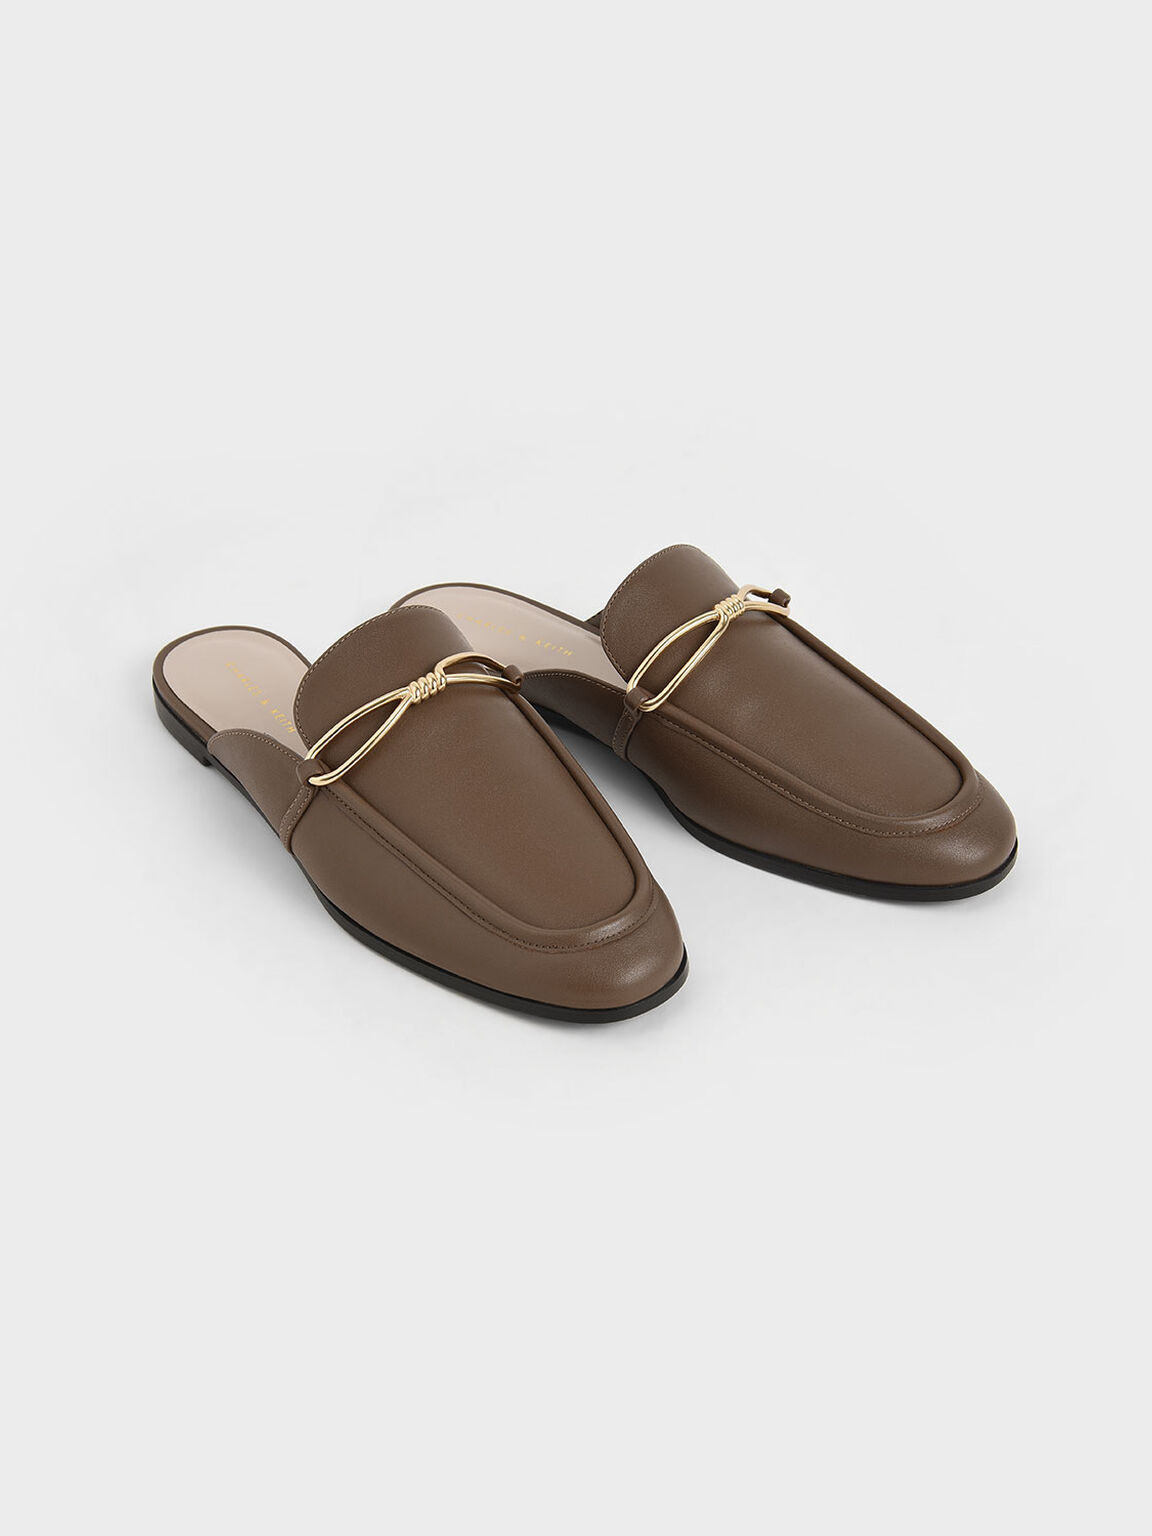 Metallic Accent Loafer Mules, Brown, hi-res